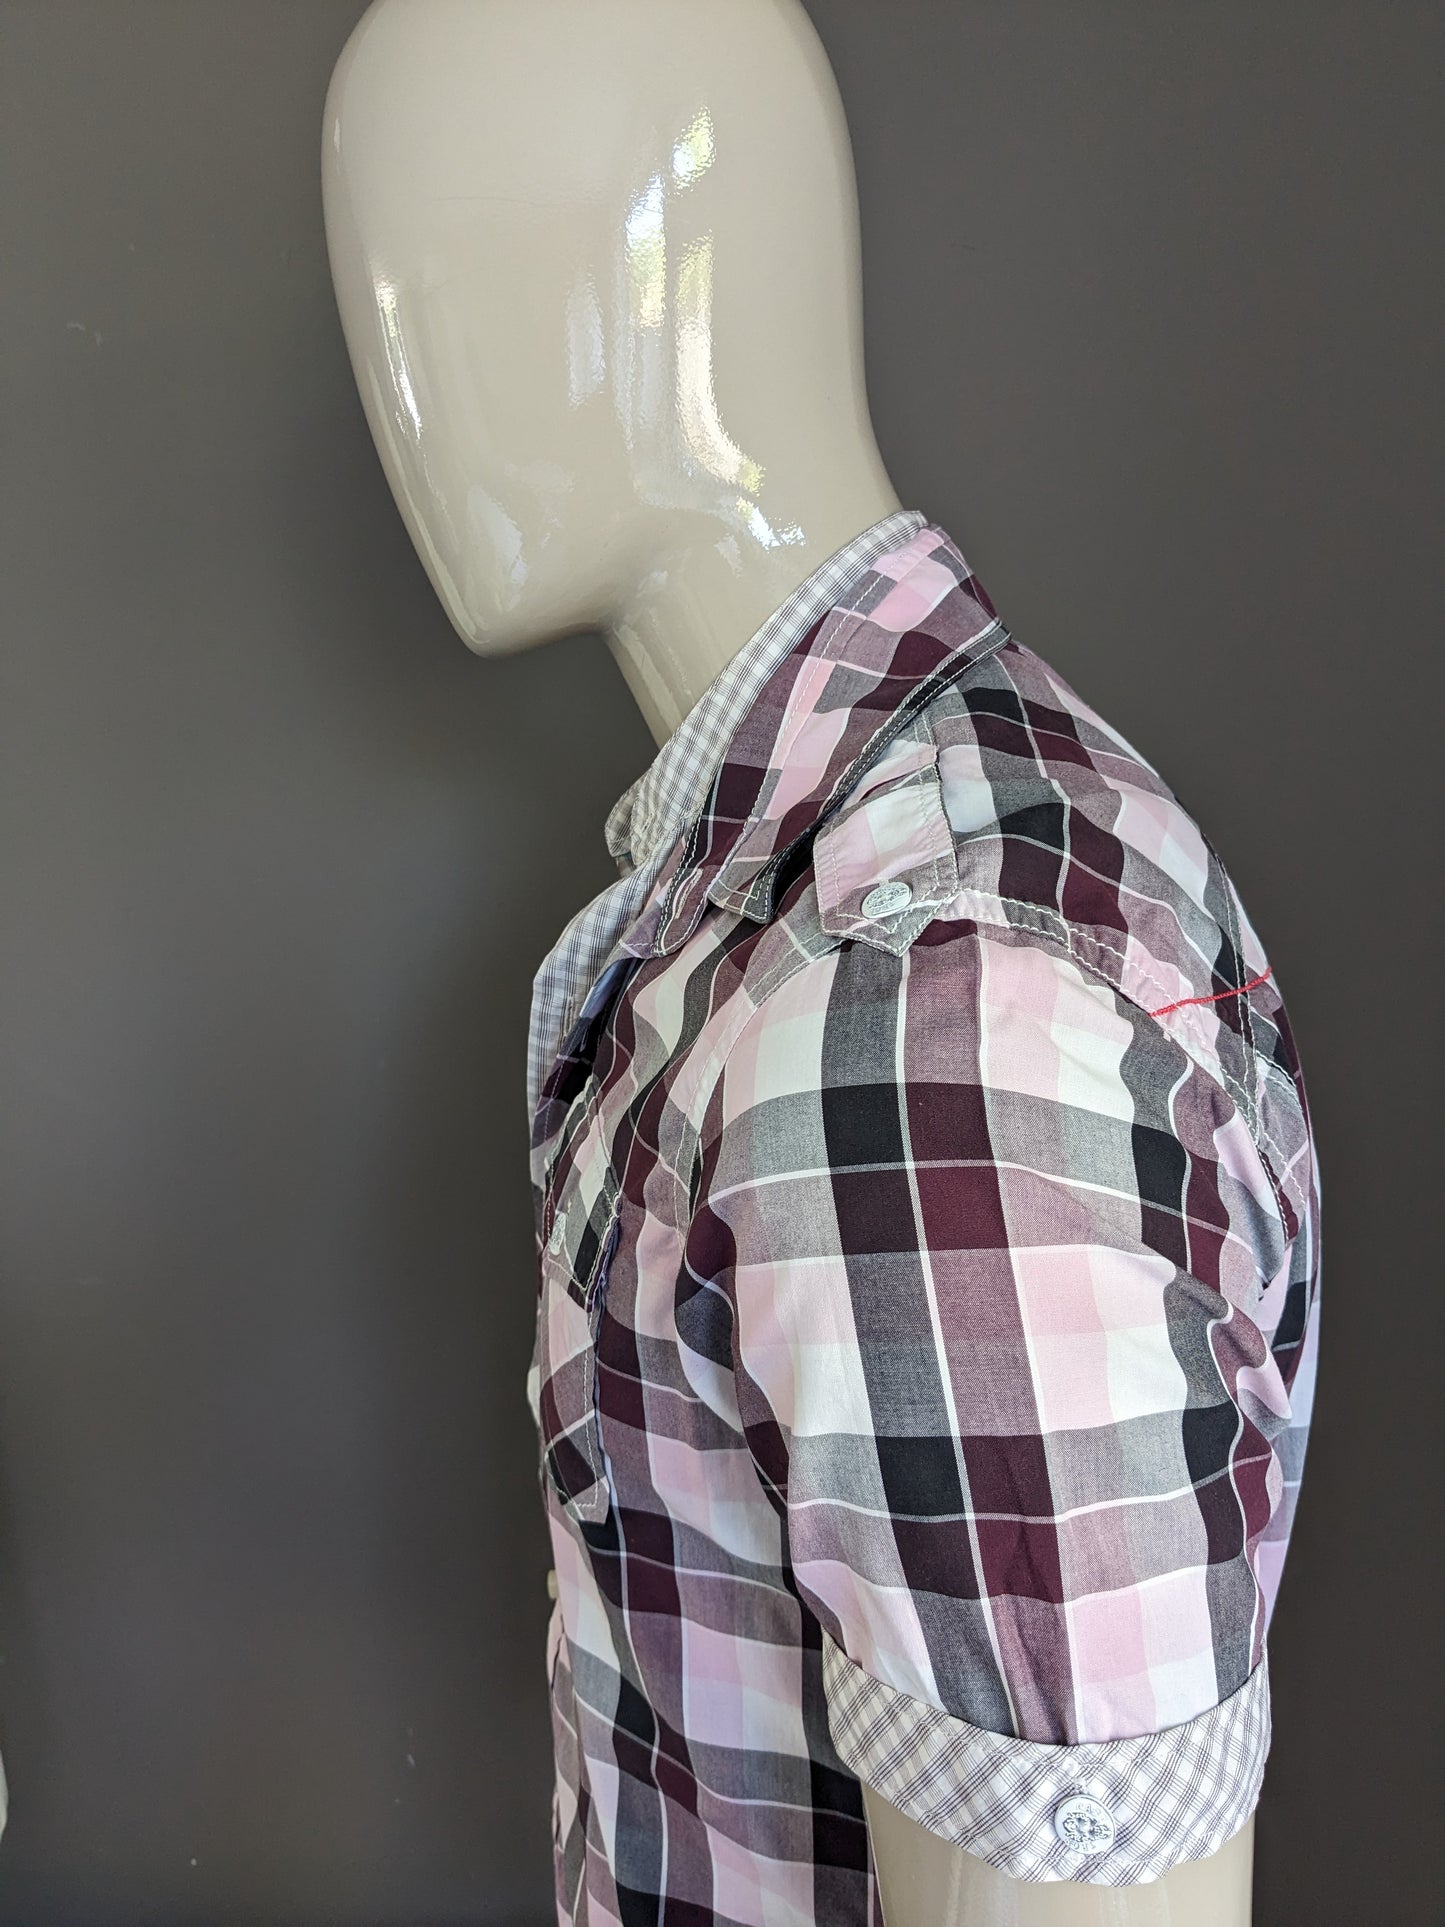 Cast Iron Shirt short sleeve and double collar. Purple pink black and white checkered. Size XL.